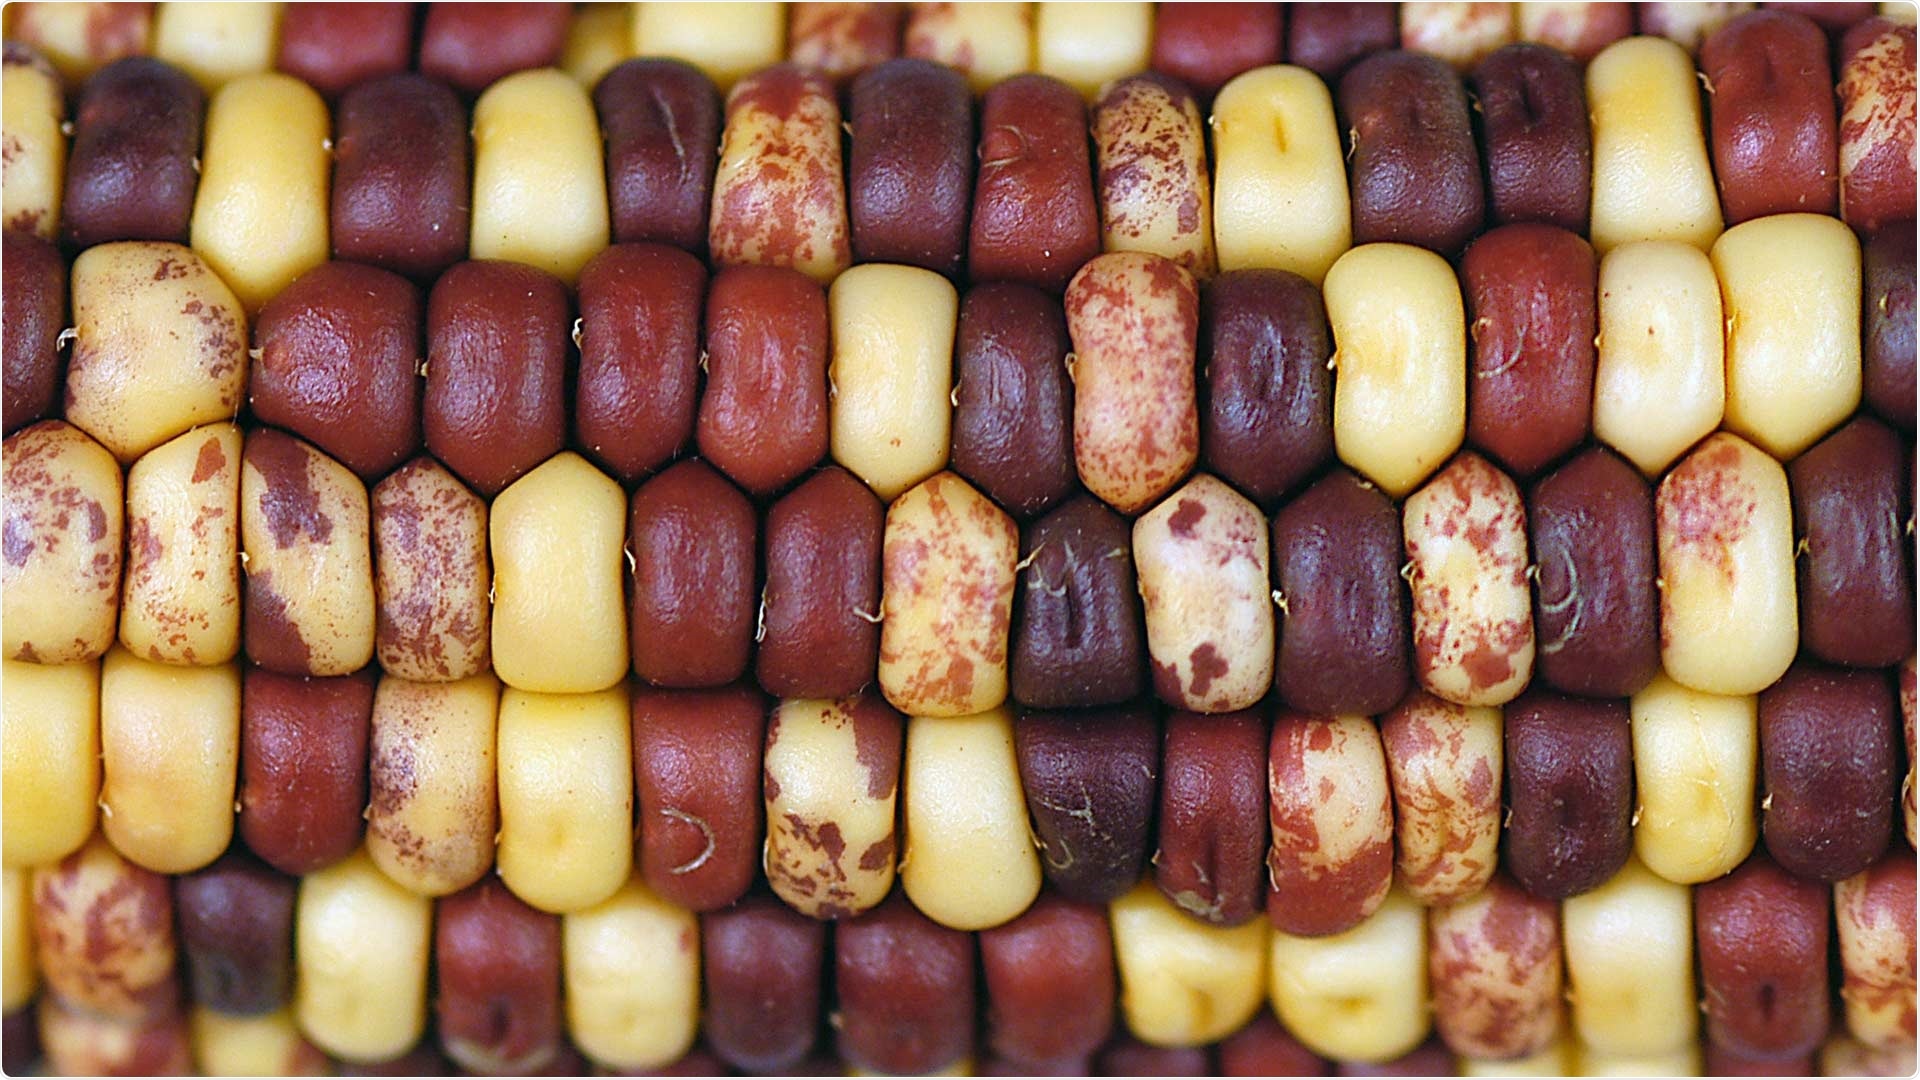 Researchers identify genome sequences of 26 corn strains